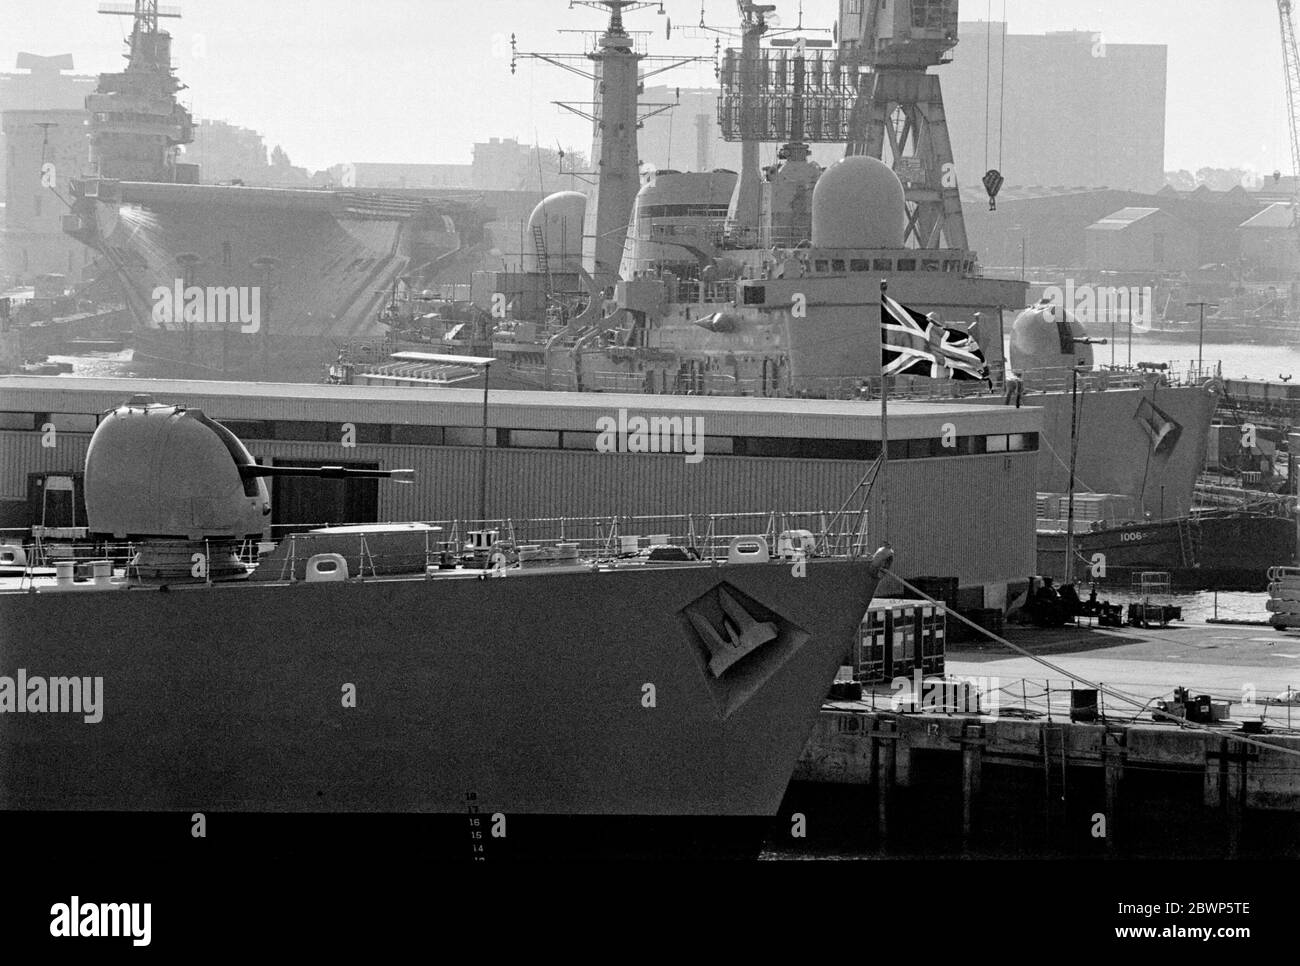 AJAXNETPHOTO. 29TH MAY, 1982. PORTSMOUTH, ENGLAND. - BUSY SCENES IN THE NAVAL BASE. HMS BULWARK VISIBLE DISTANT, LEFT. PHOTO:JONATHAN EASTLAND/AJAX REF:822905 3037 Stock Photo